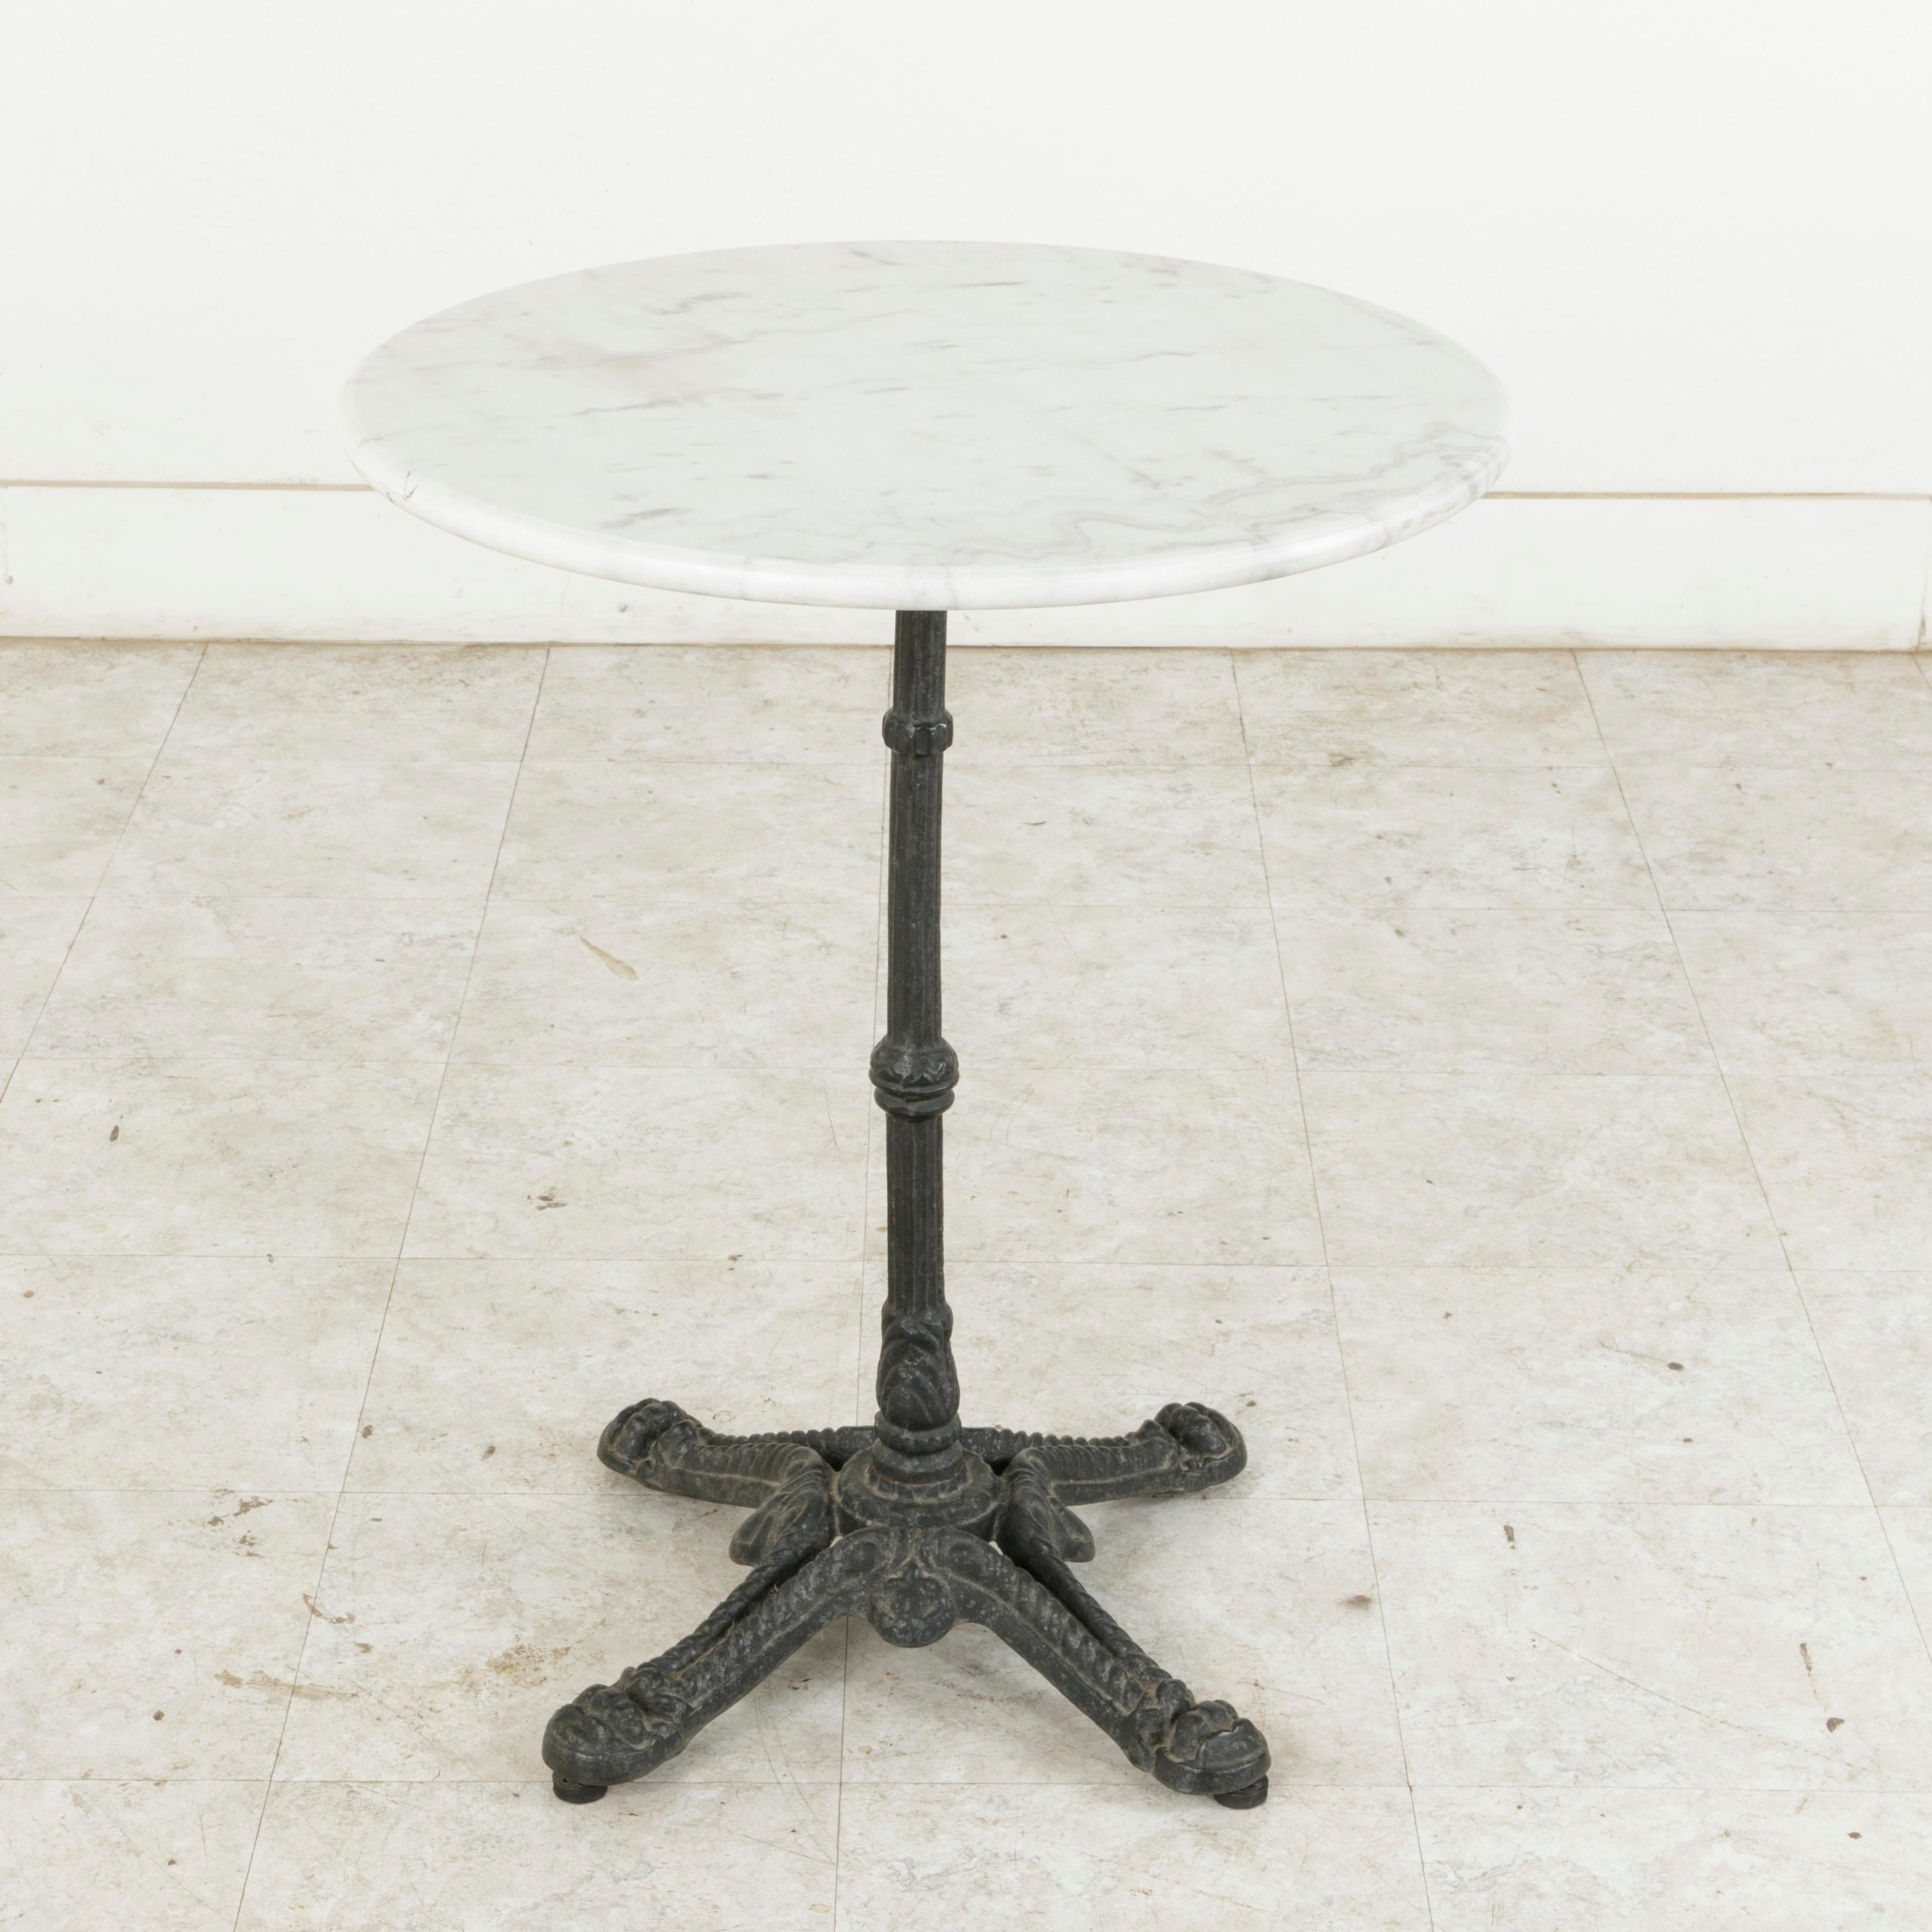 This classic French iron bistro table or cafe table from the early twentieth century features a solid round white marble top with a rounded edge. The top rests on a cast iron base supported by a central fluted pillar. The base is detailed with